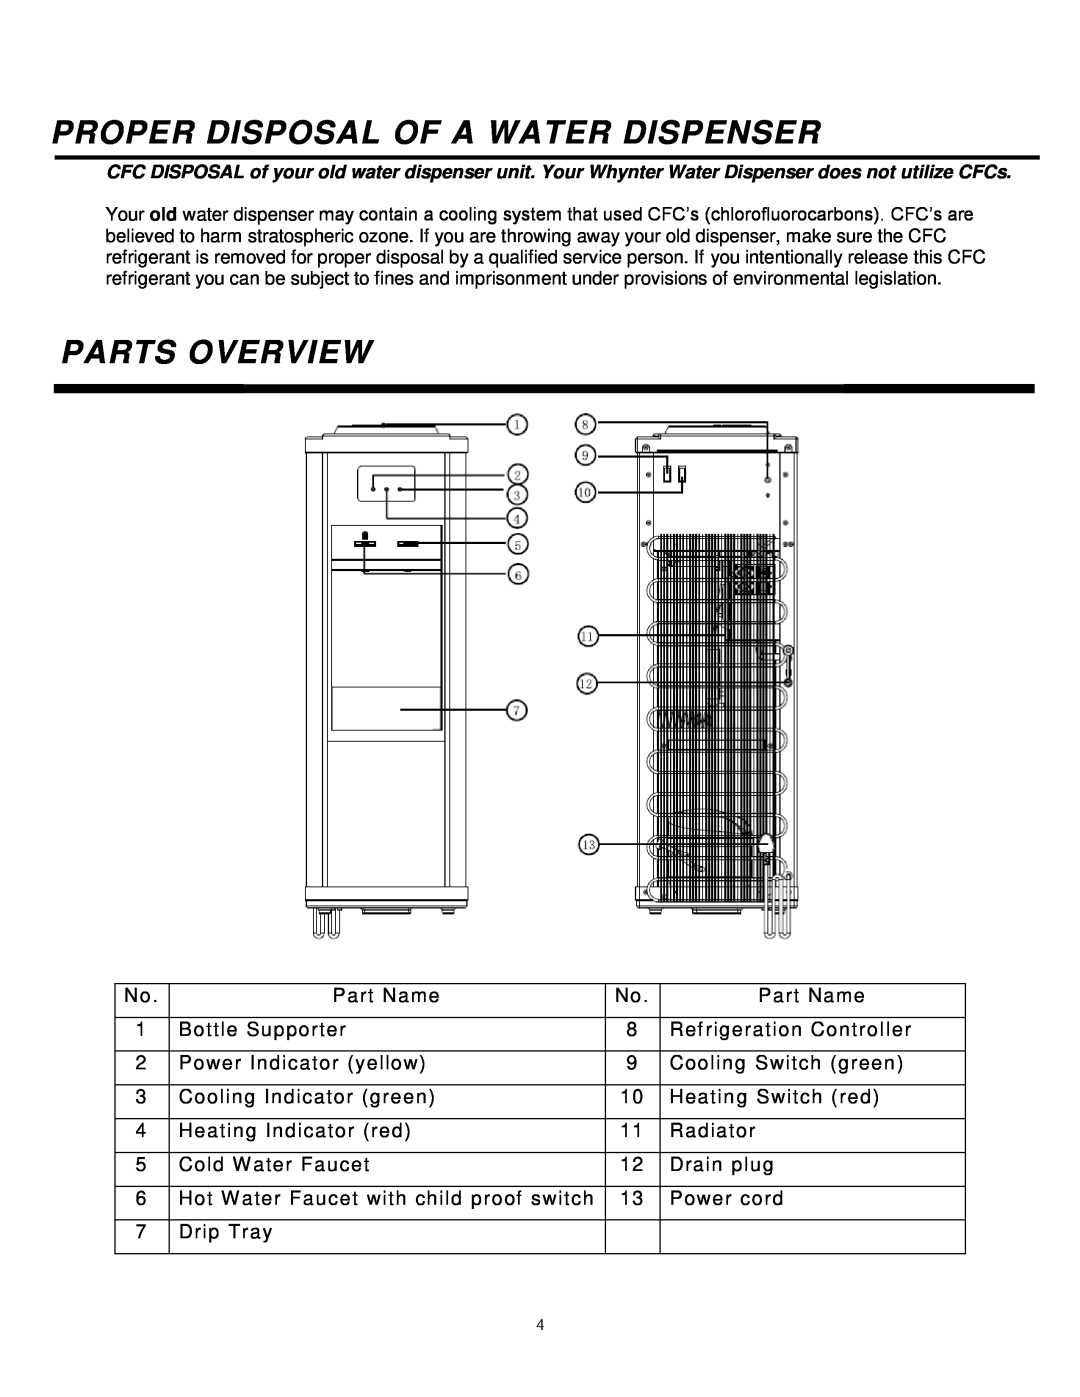 Whynter FX-7SB/W instruction manual Proper Disposal Of A Water Dispenser, Parts Overview 